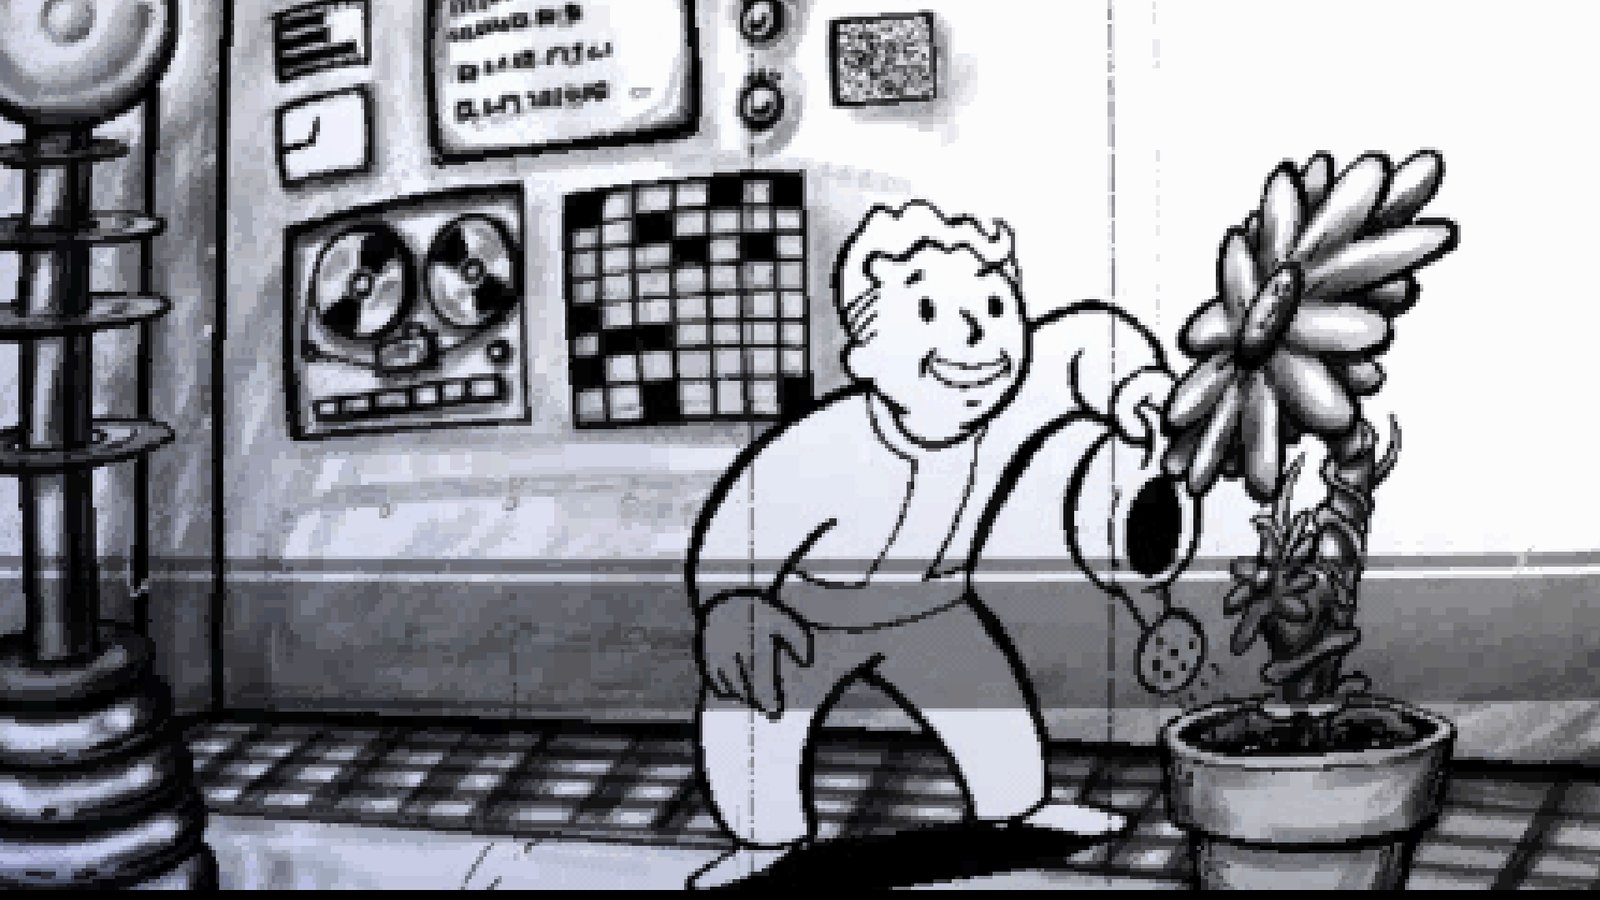 Vault Boy waters a plant